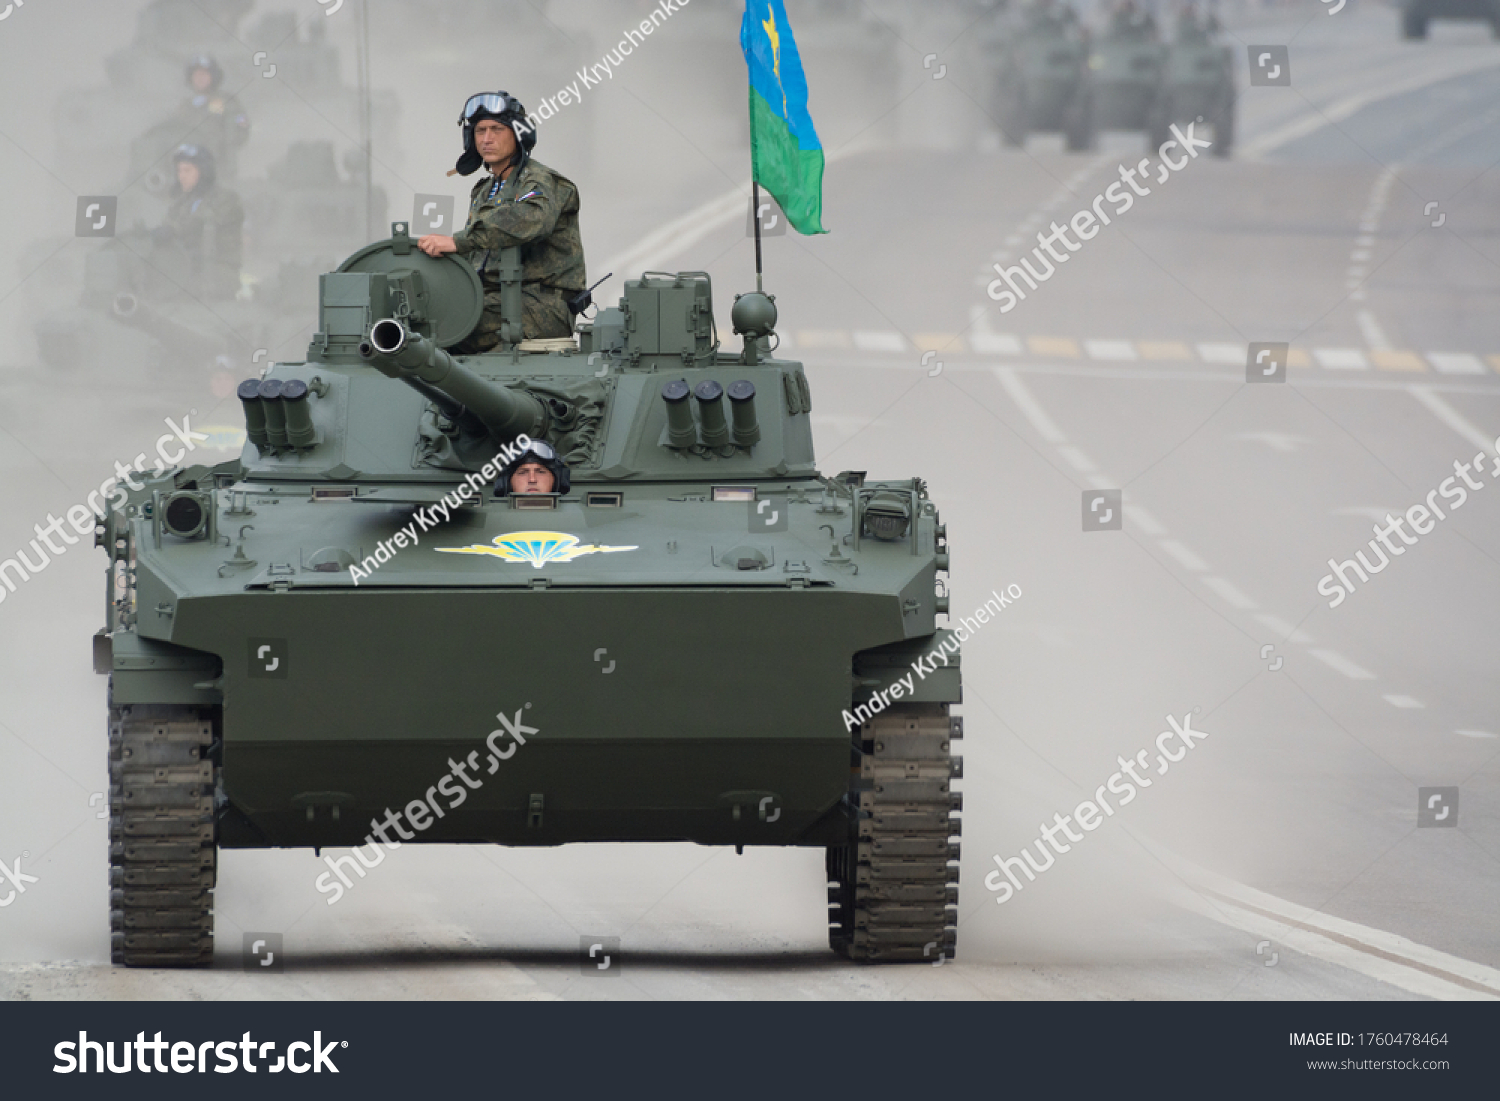 https://image.shutterstock.com/z/stock-photo-june-moscow-russia-the-bmd-m-goes-to-red-square-to-participate-in-the-rehearsal-of-the-1760478464.jpg